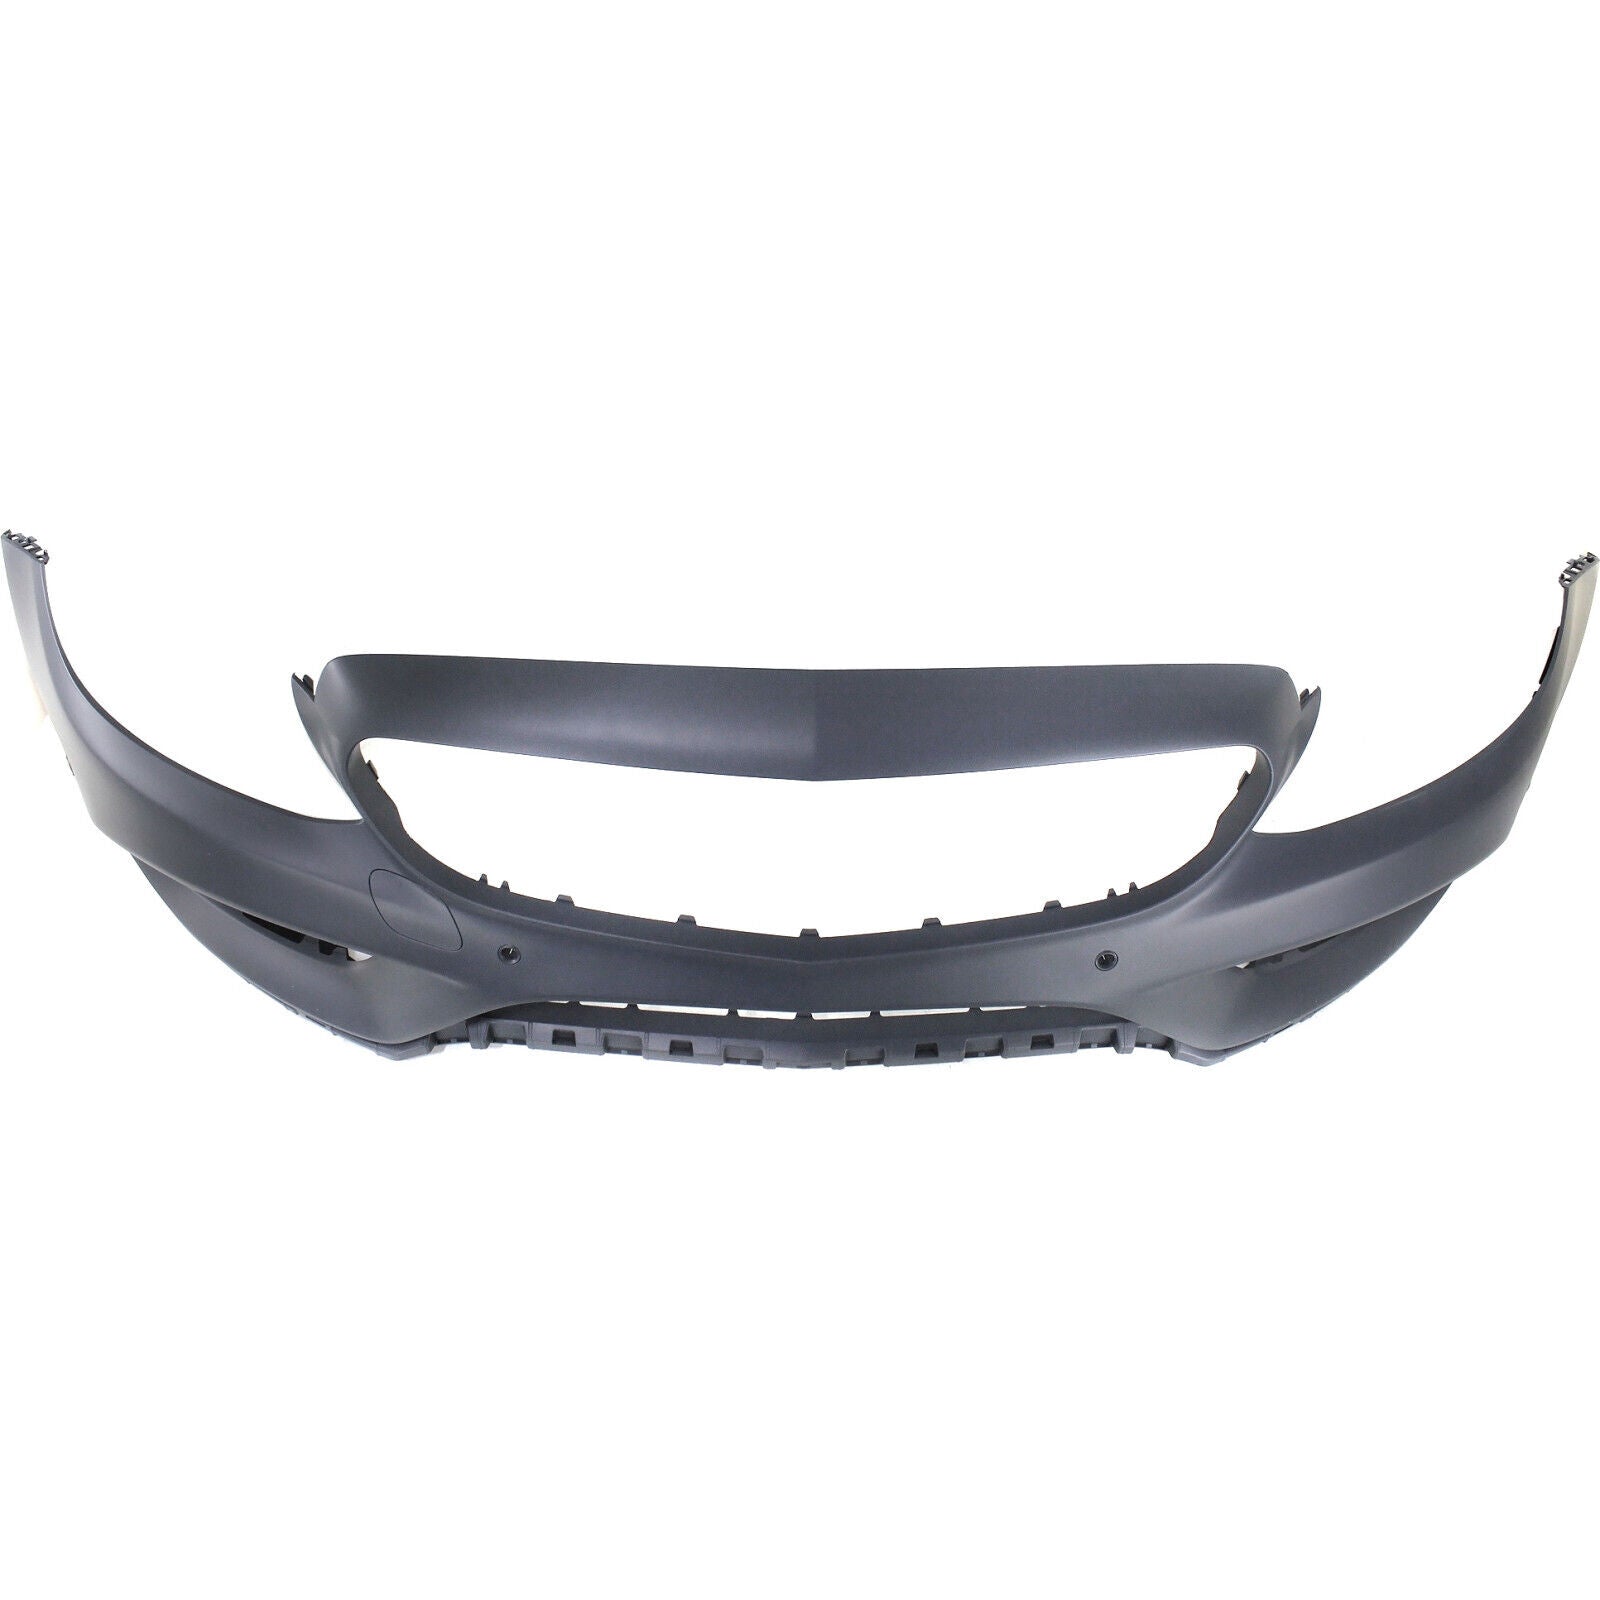 2018-2018 MERCEDES-BENZ C-CLASS; Front Bumper Cover; WGN/S205 w/AMG w/Sport w/o Surround View w/Park Sensor Painted to Match